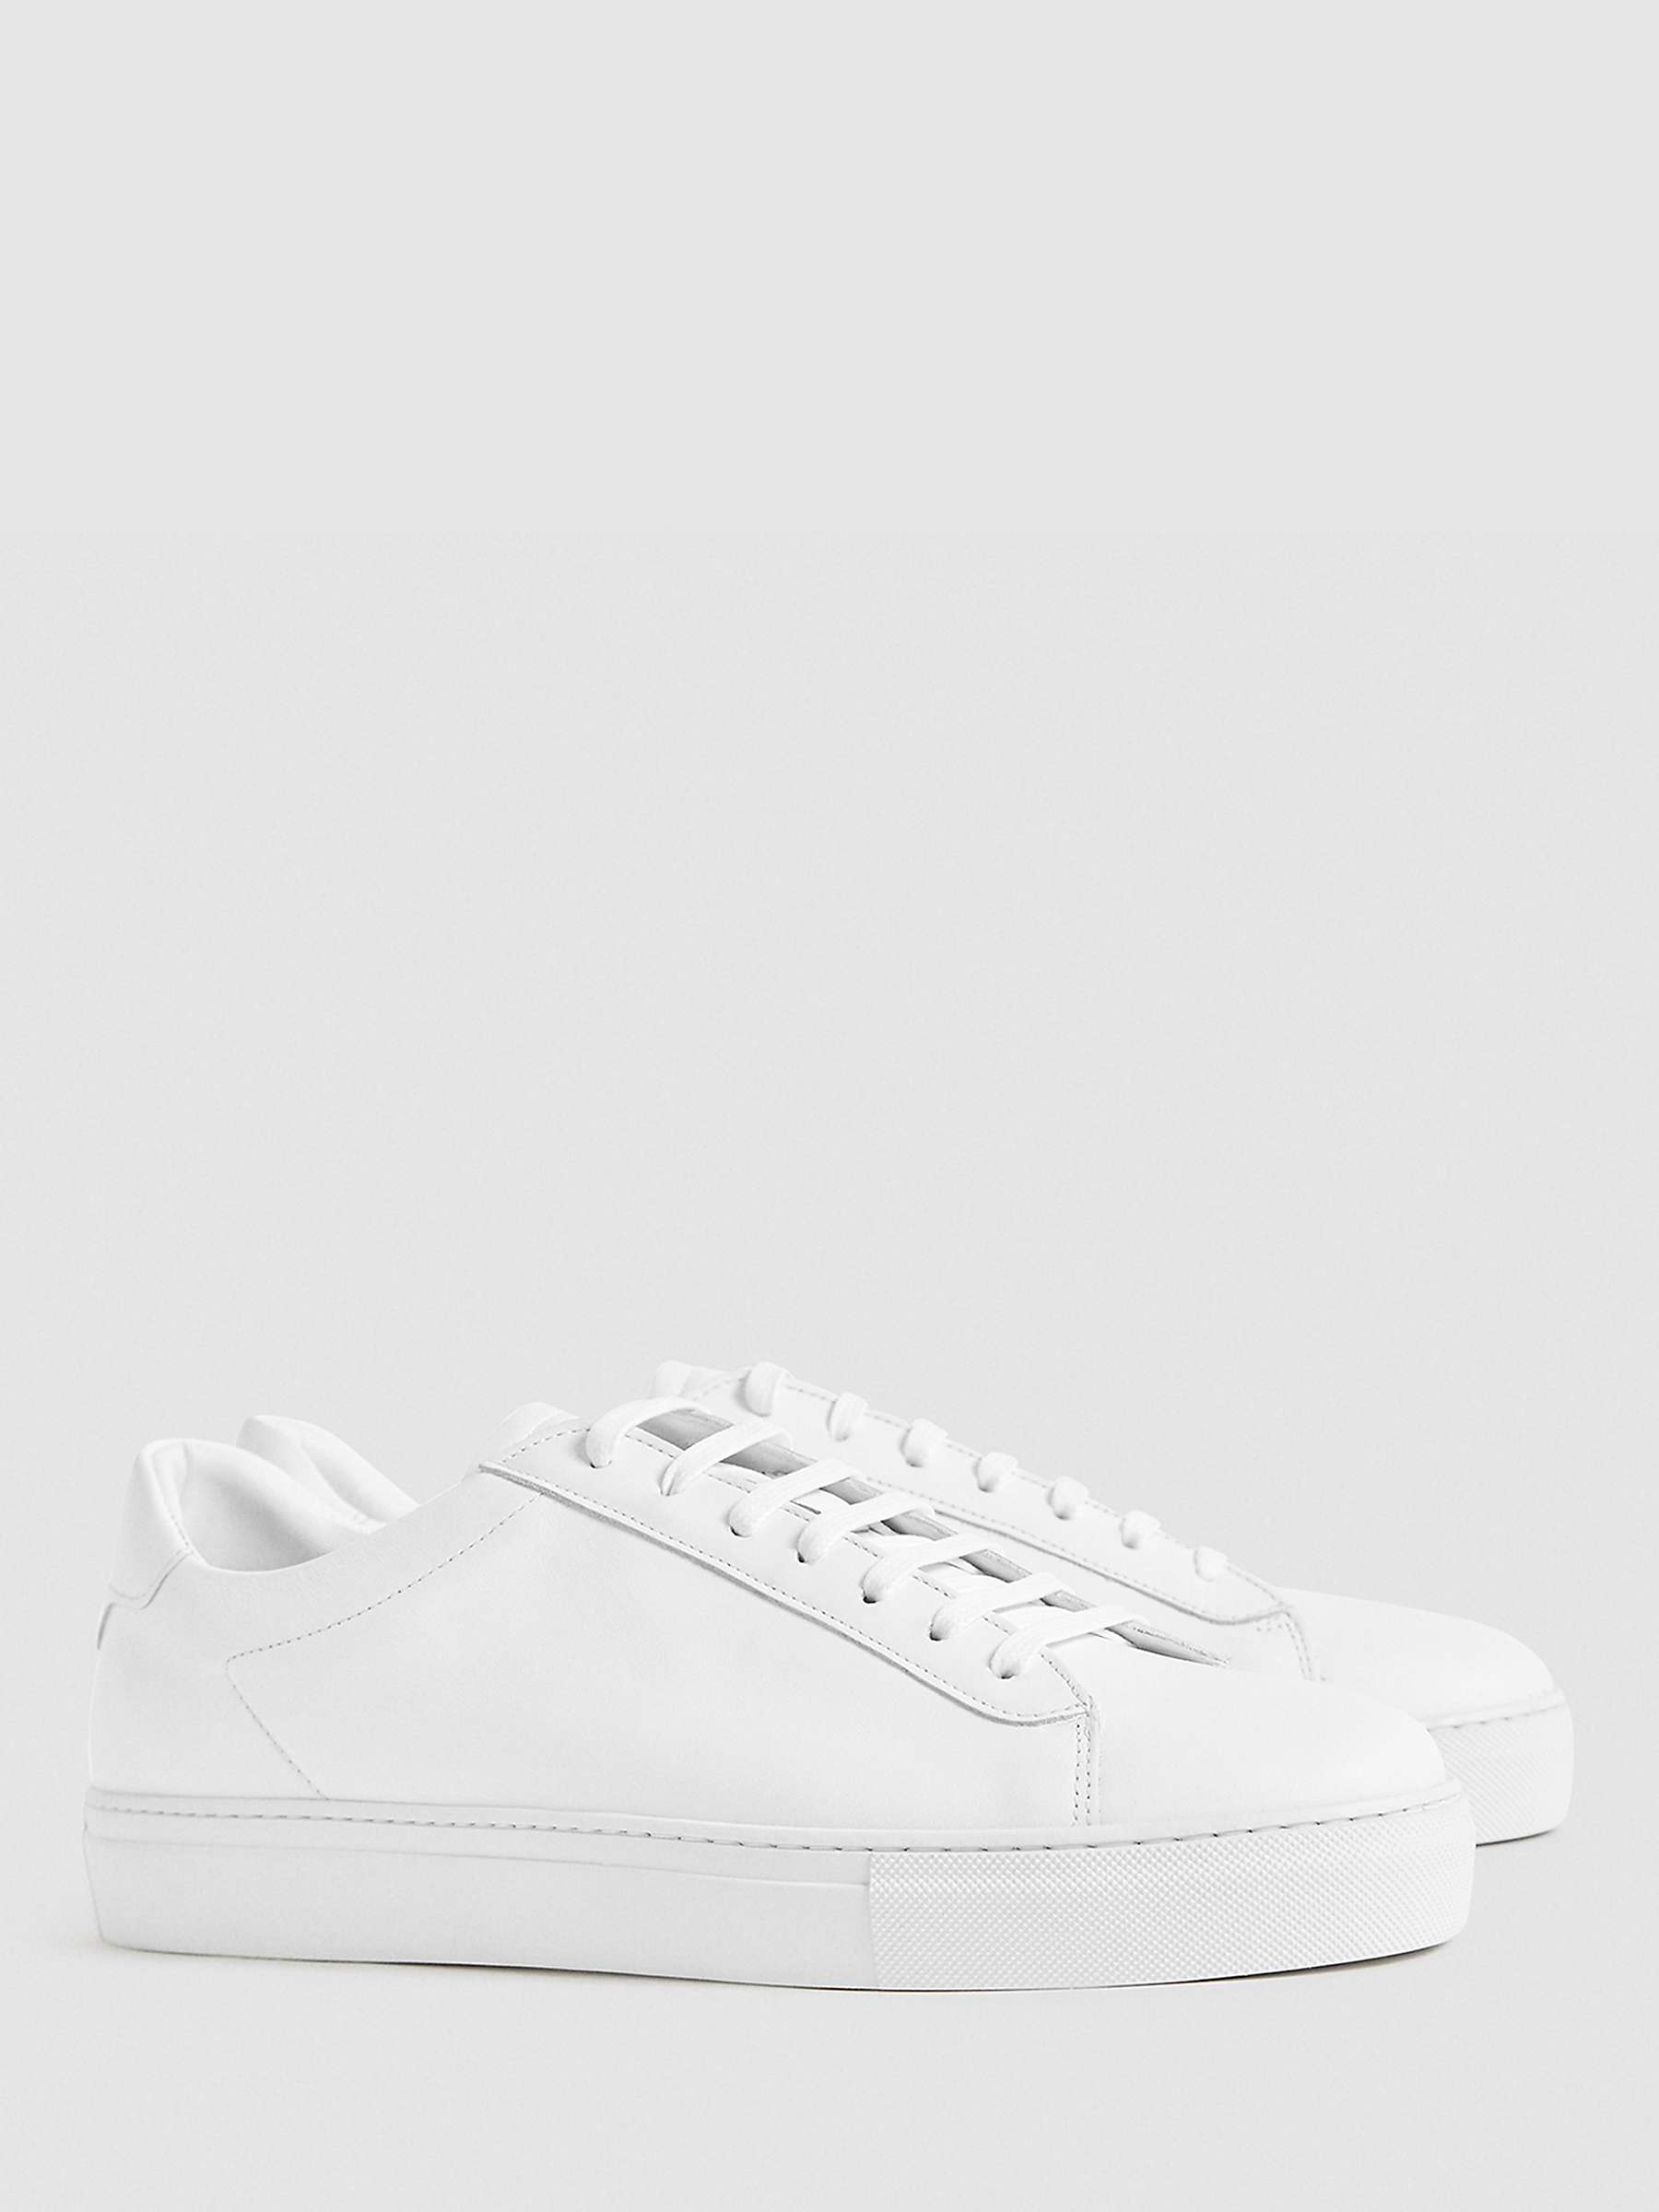 Reiss Finley Leather Trainers, White at John Lewis & Partners